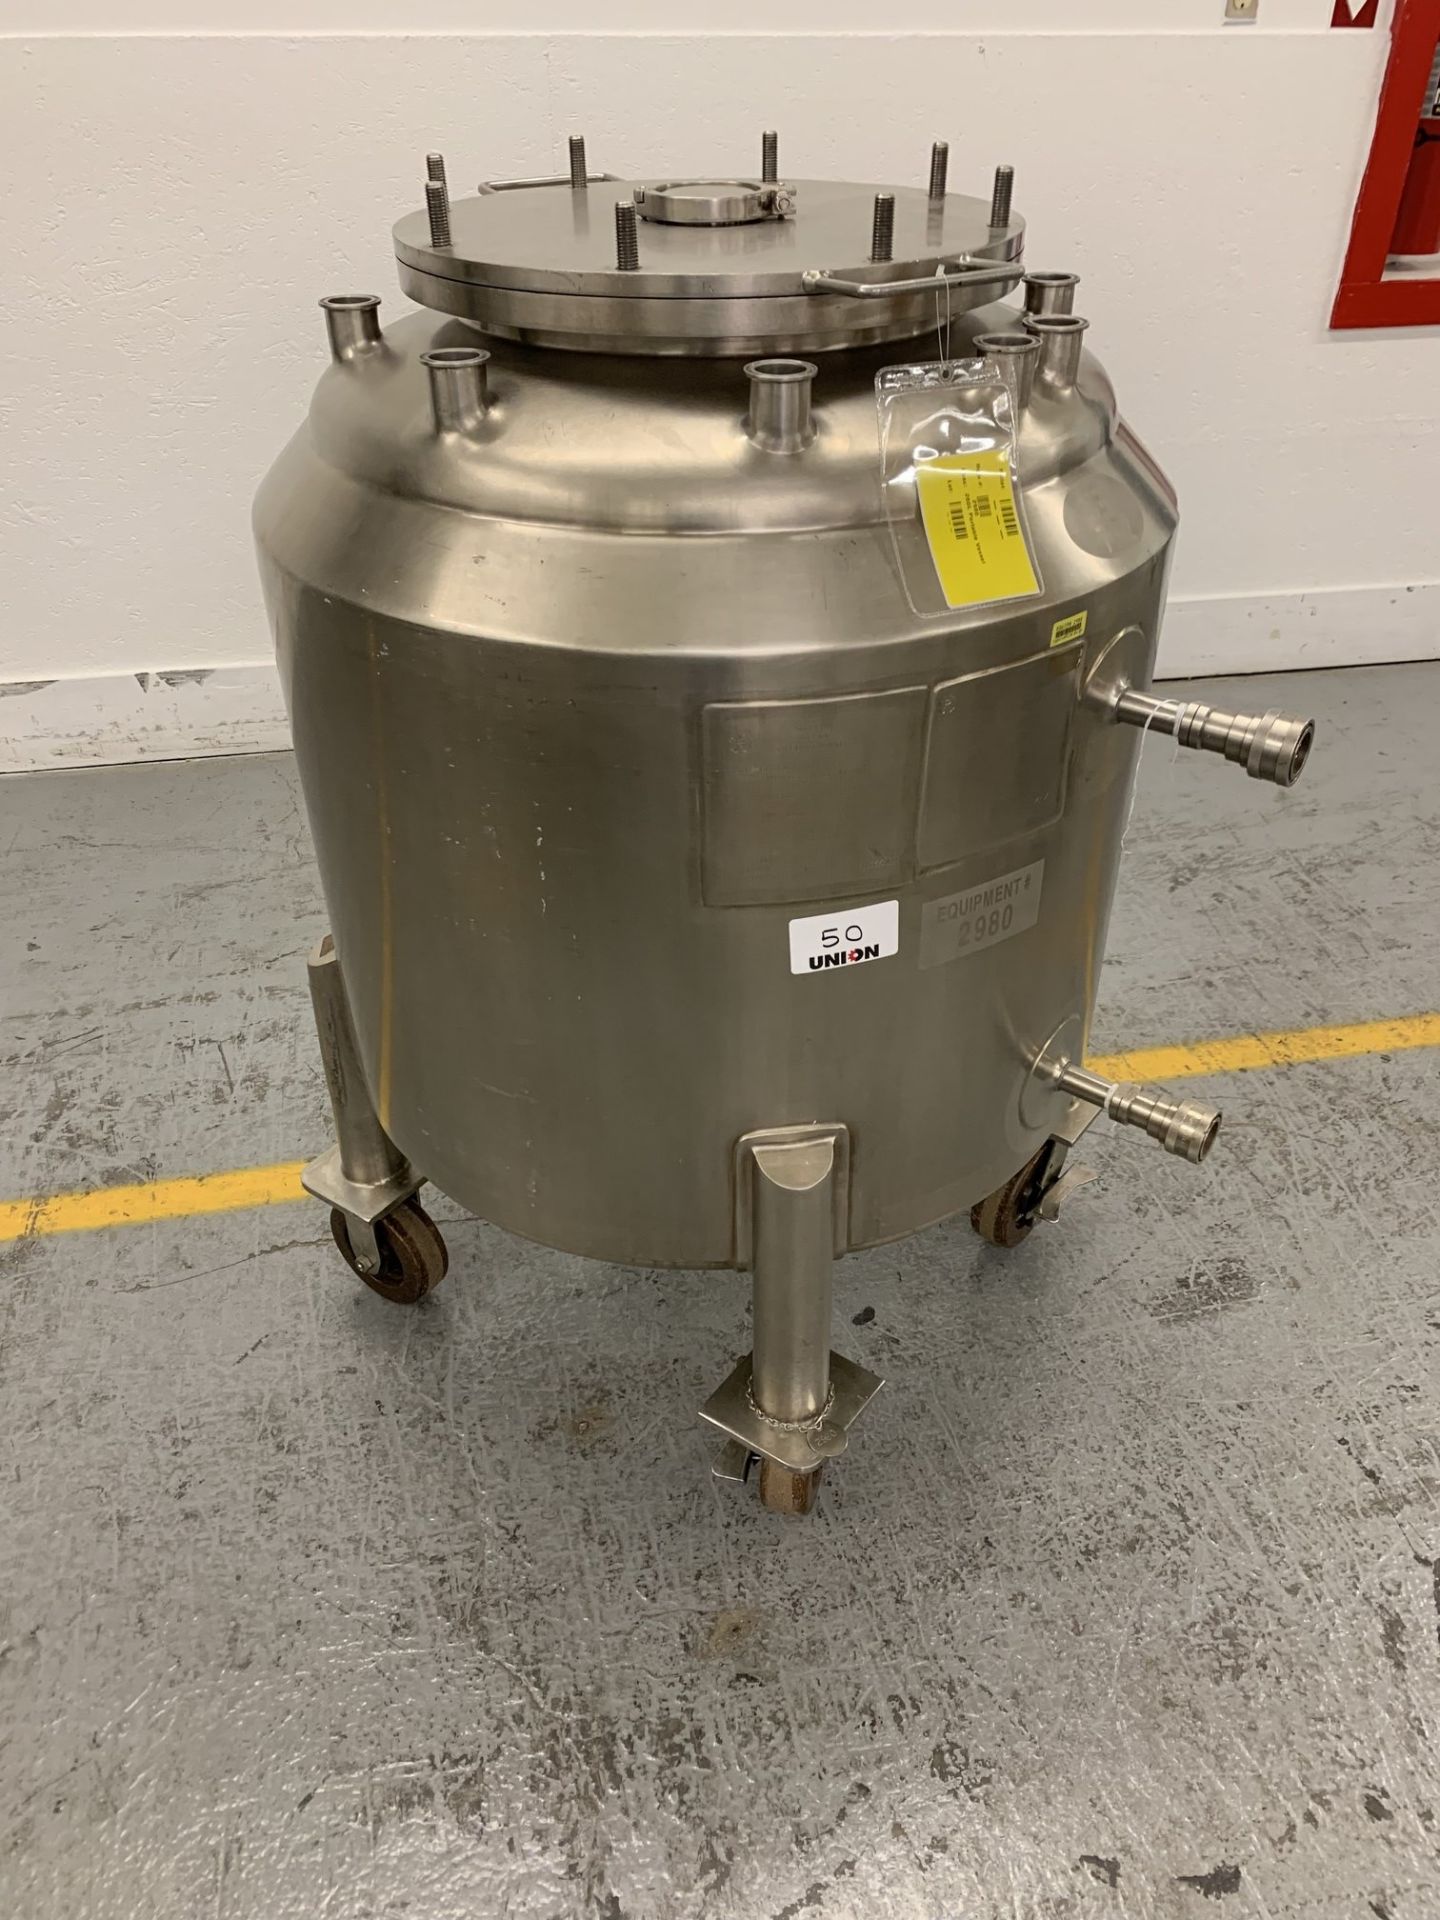 Lot # 50 - DCI Inc. 260 Liters Jacketed Pressure Tank, 304 stainless steel, 115 psi jacket, 25 psi